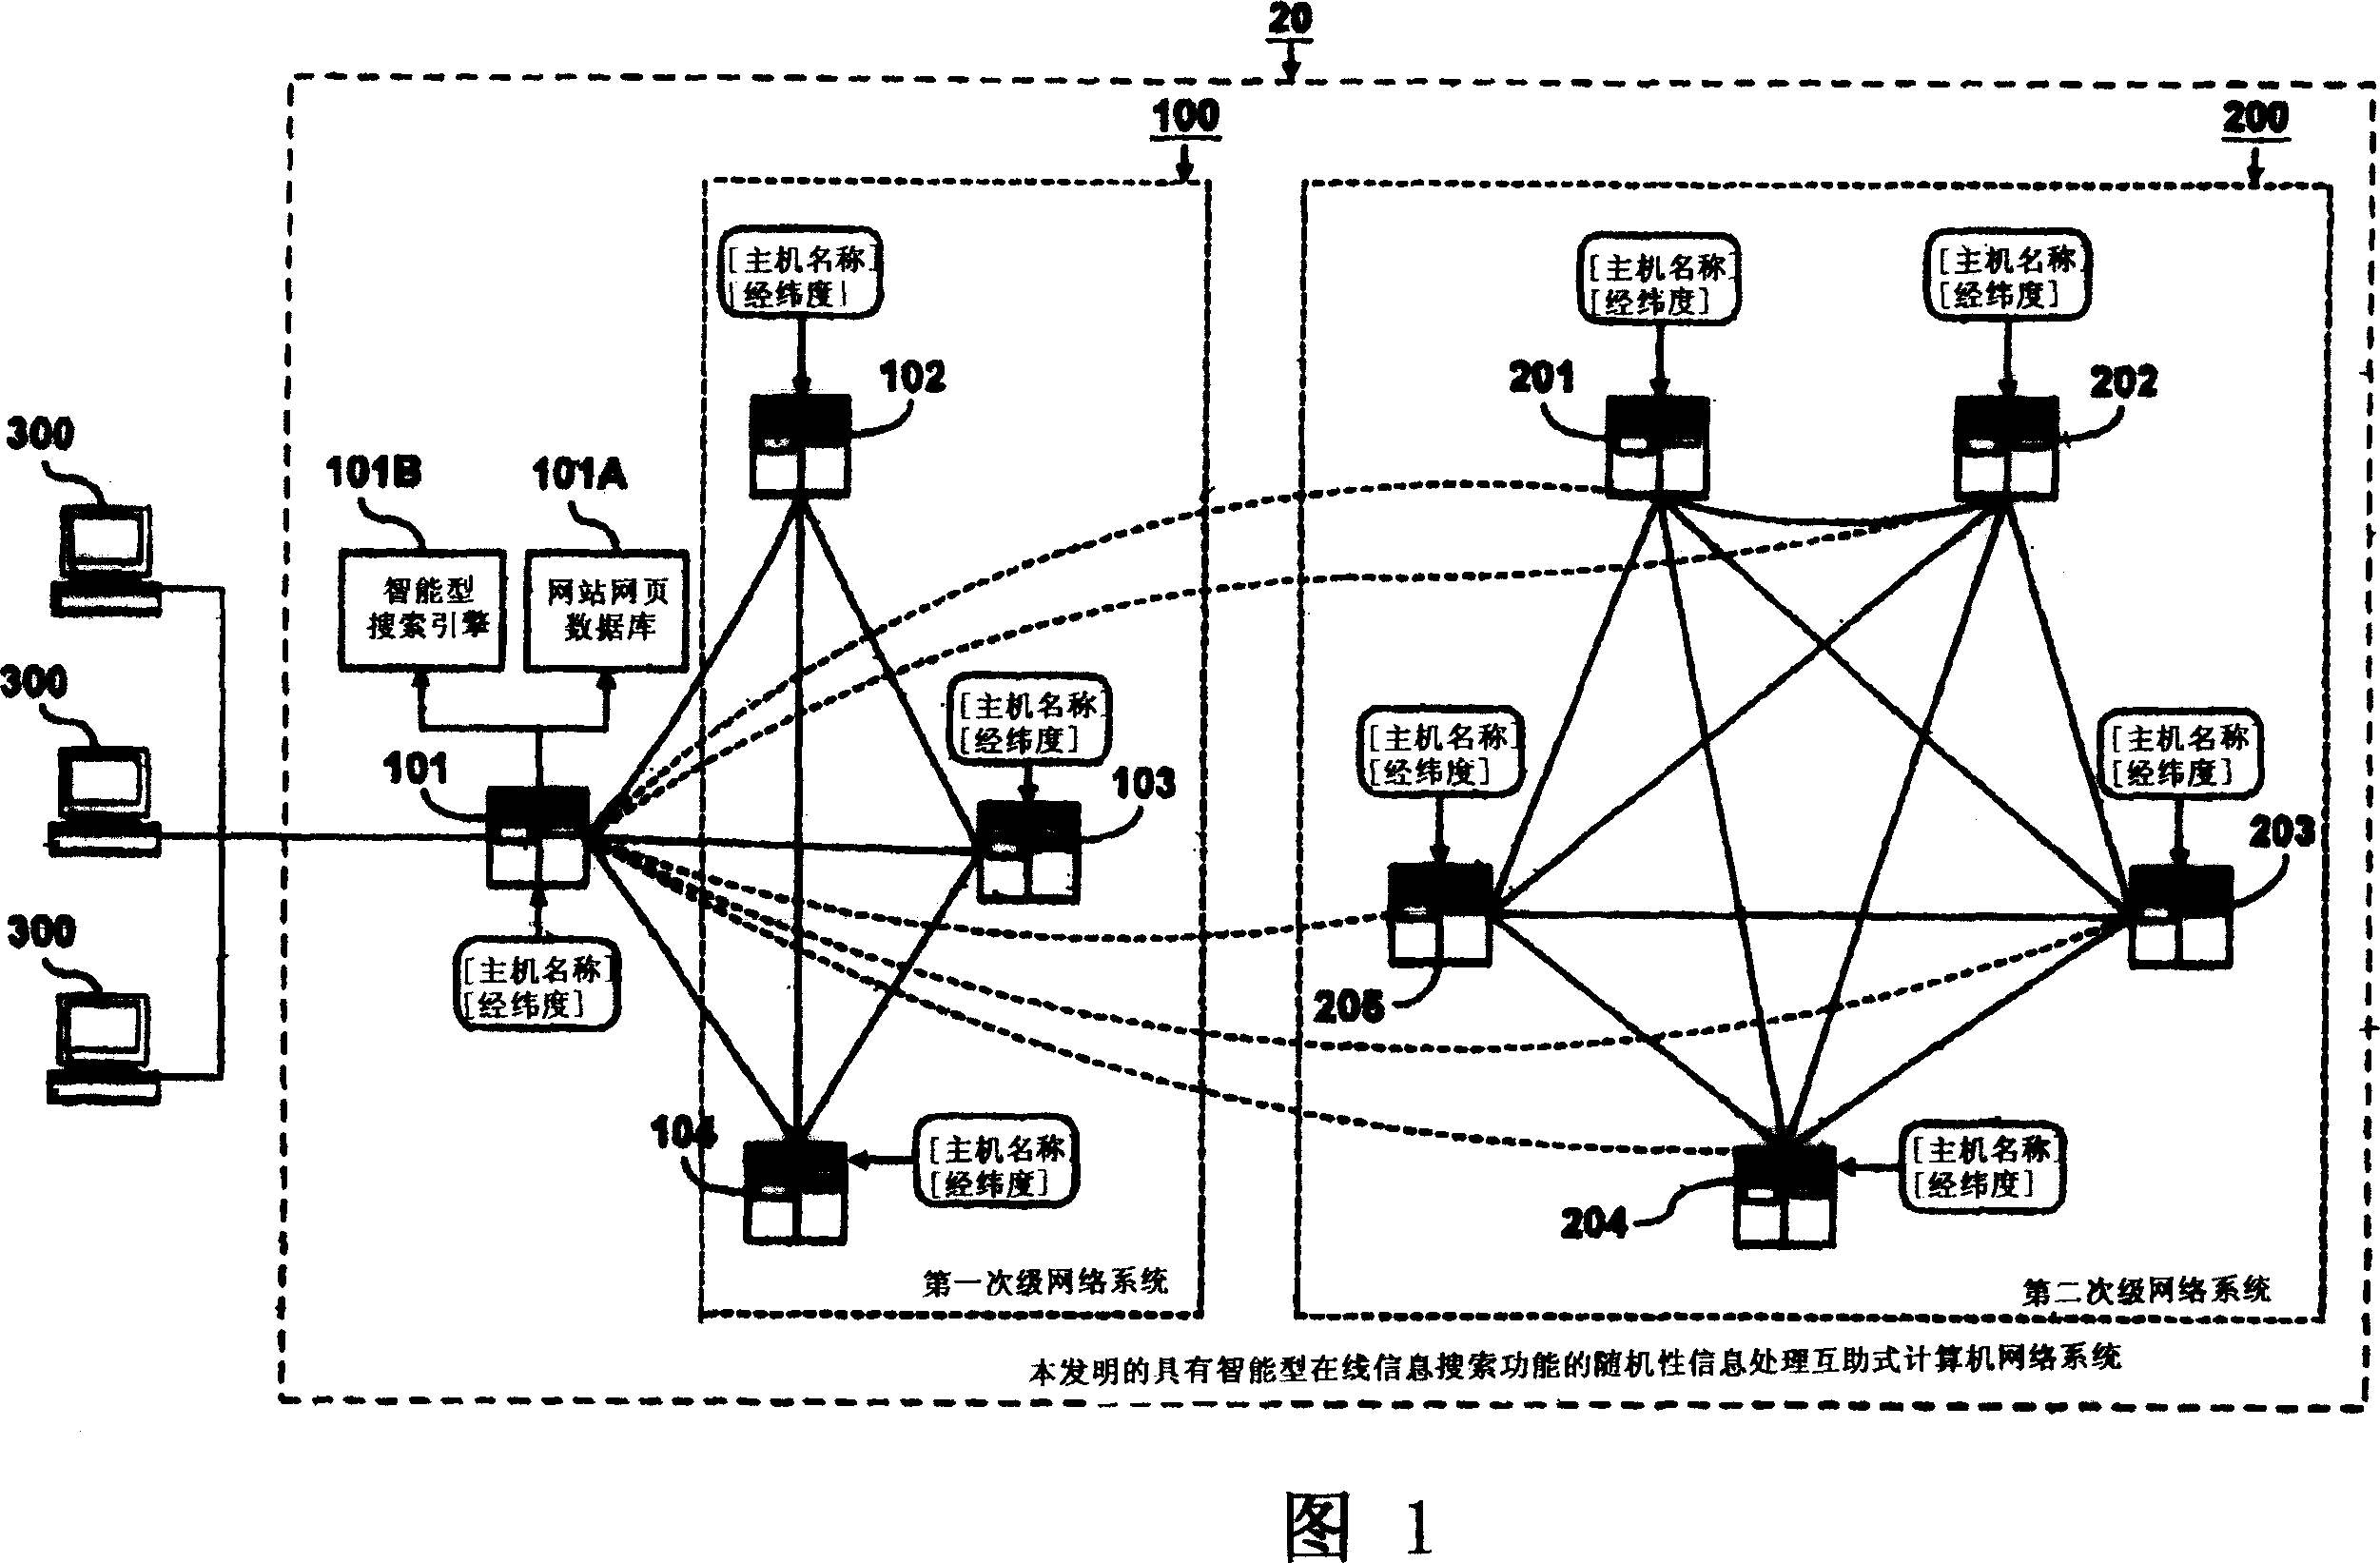 Information processing in mutual aid typed computer network information system possessing intelligent type online information searching function